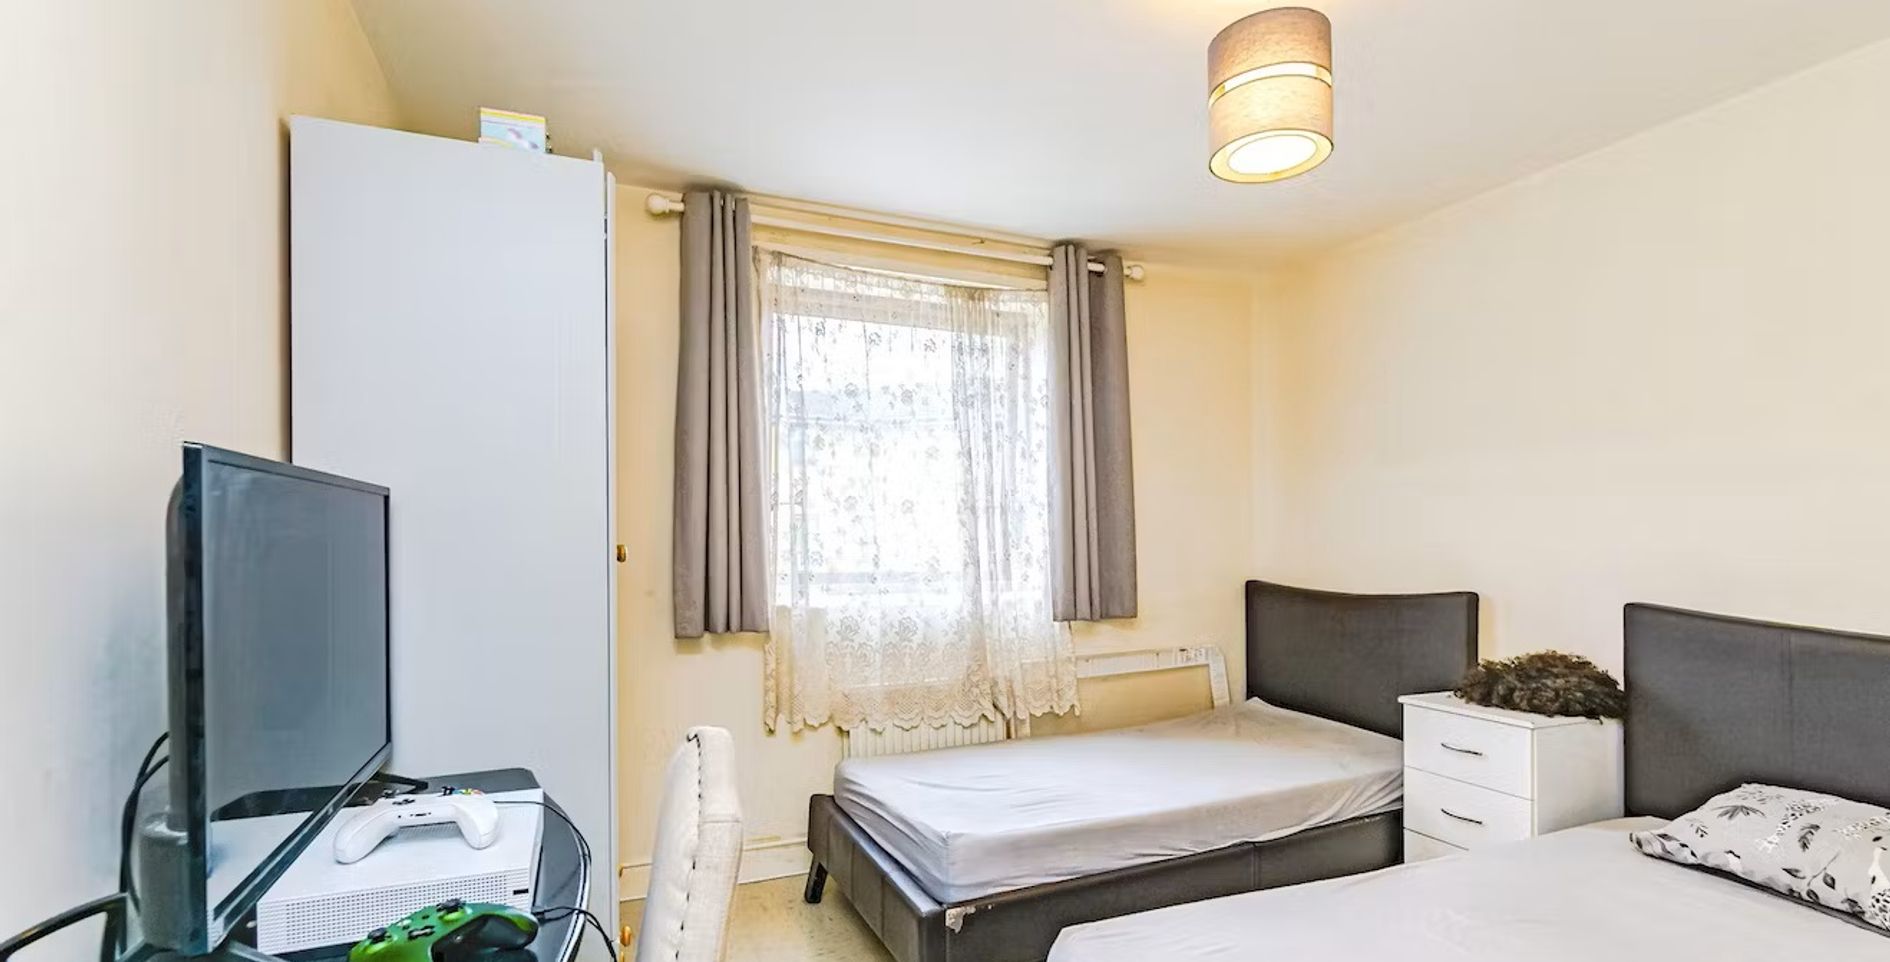 CR0 2NG – 2 bedroom apartment in Croydon – Share to Buy